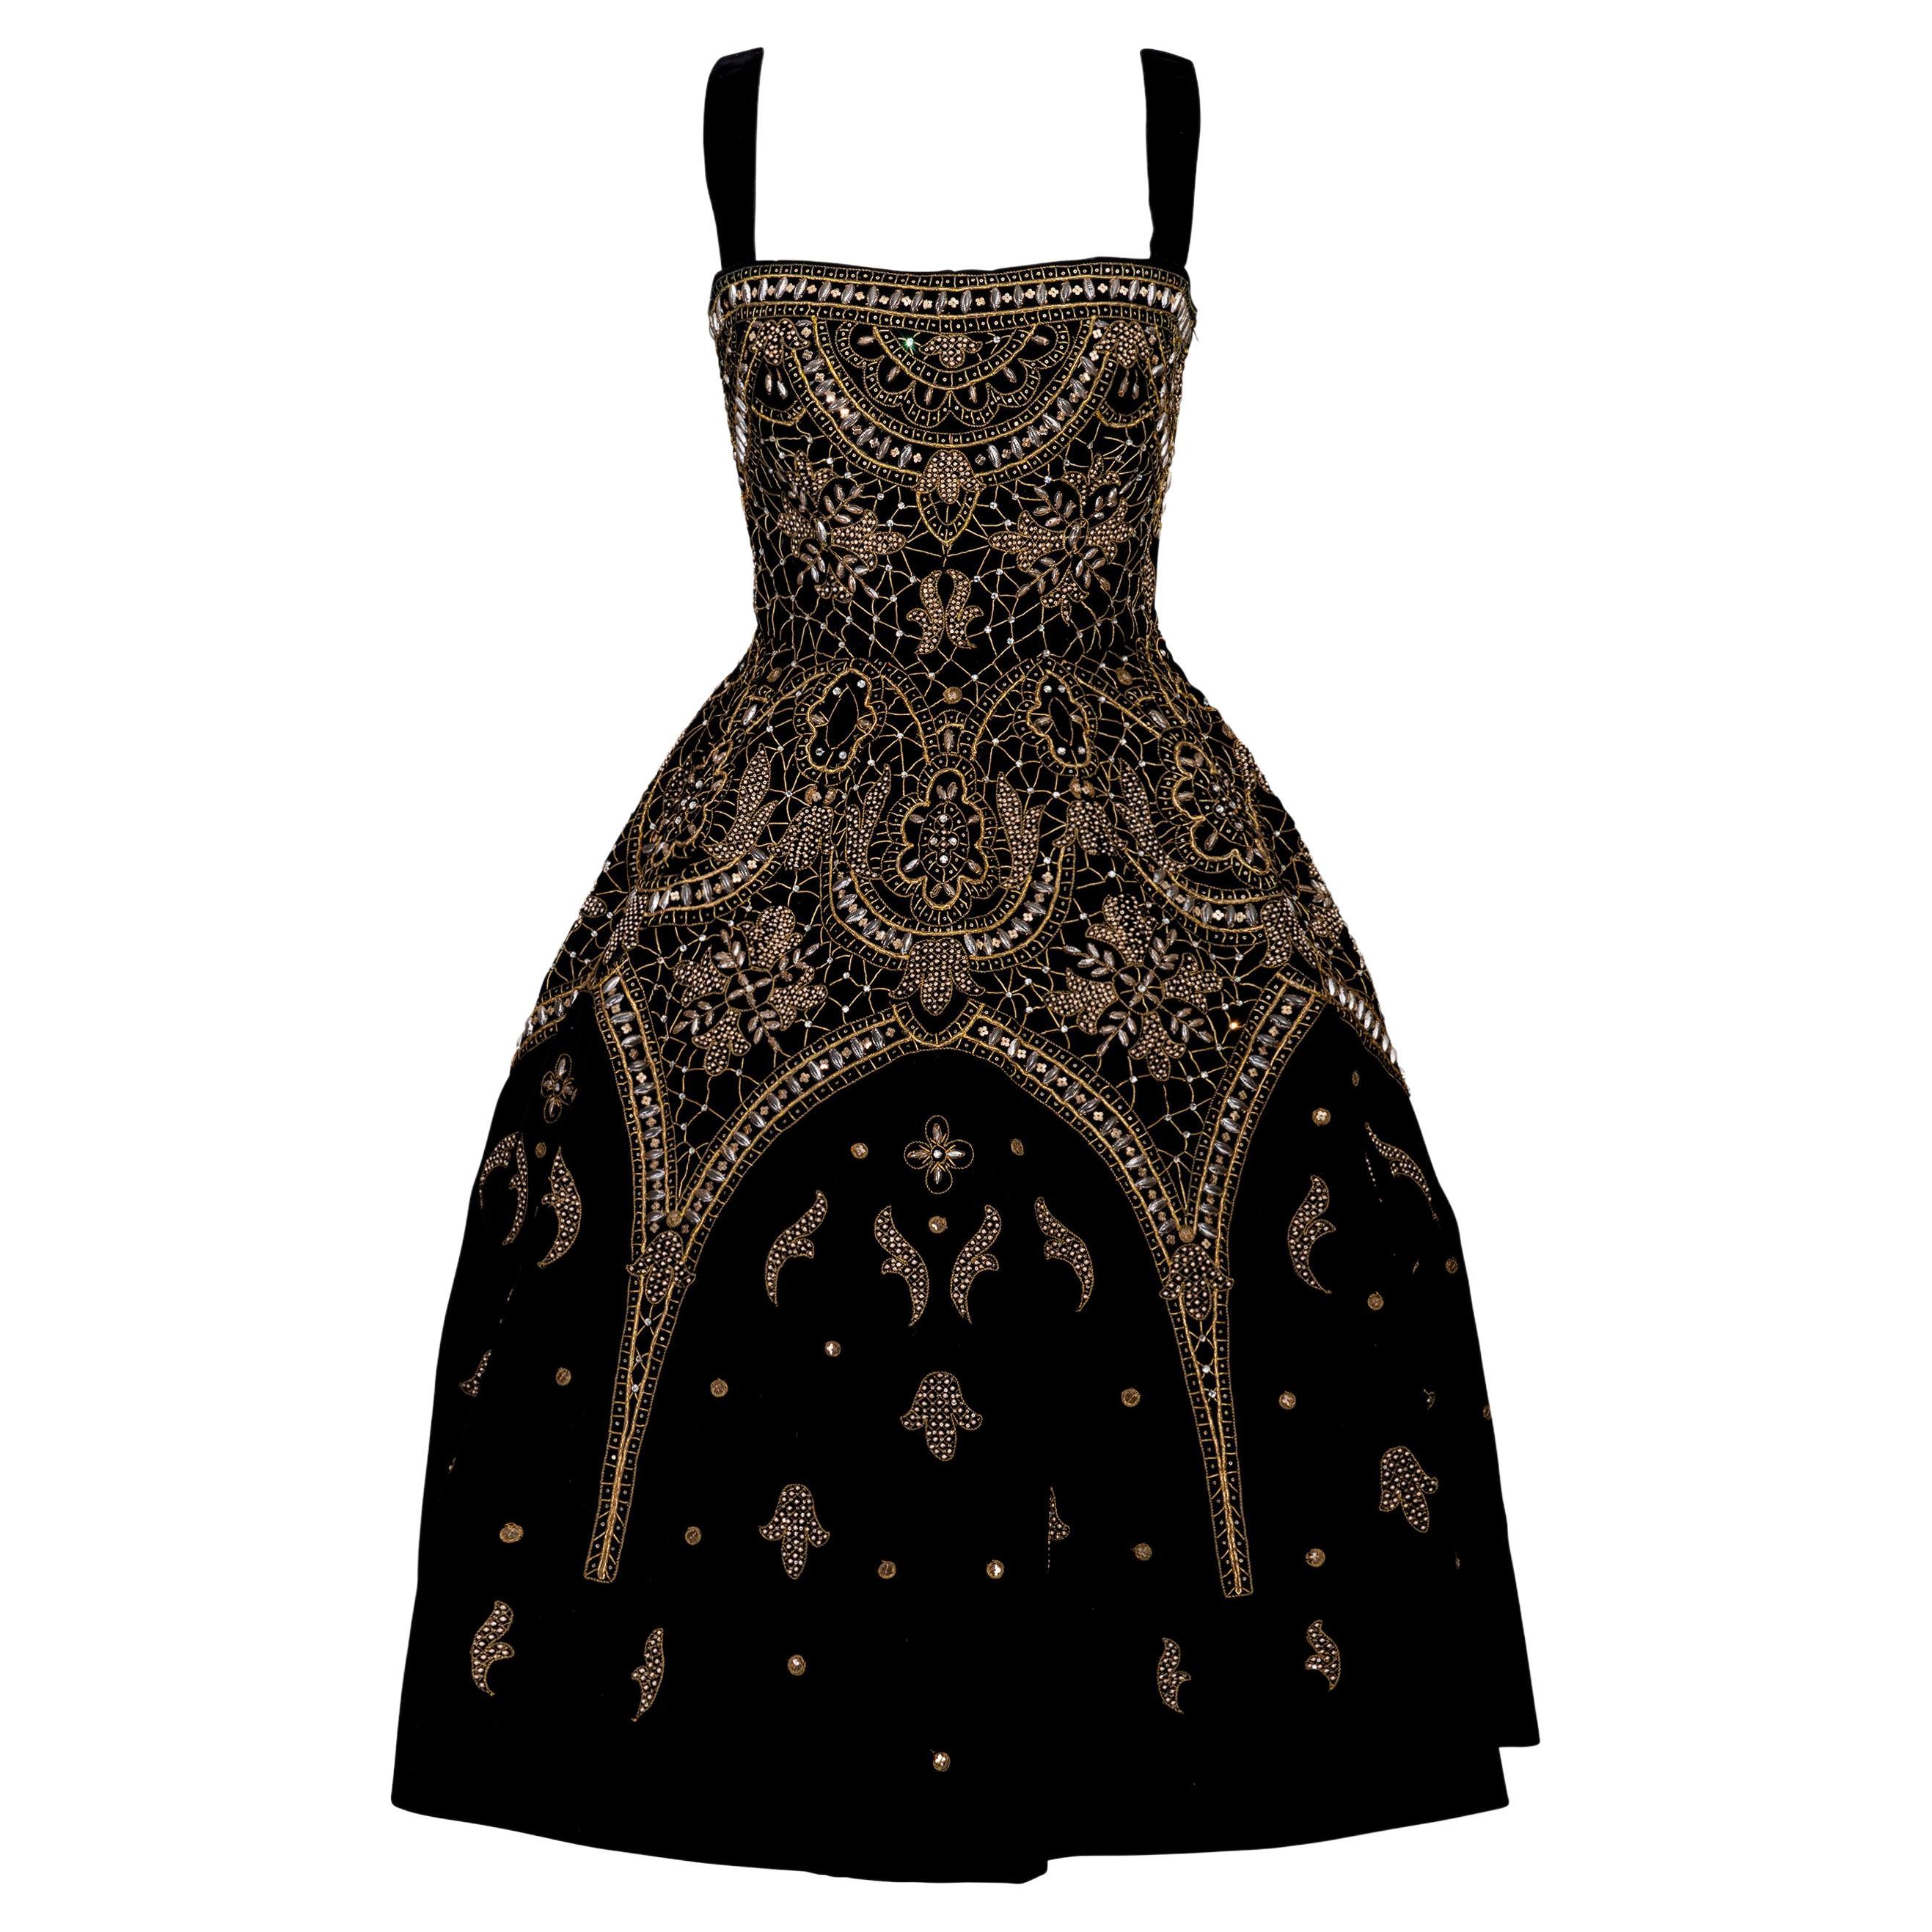 A/W 1956 Jeanne Lanvin Haute Couture Black and Gold Embroidered Velvet Dress For Sale